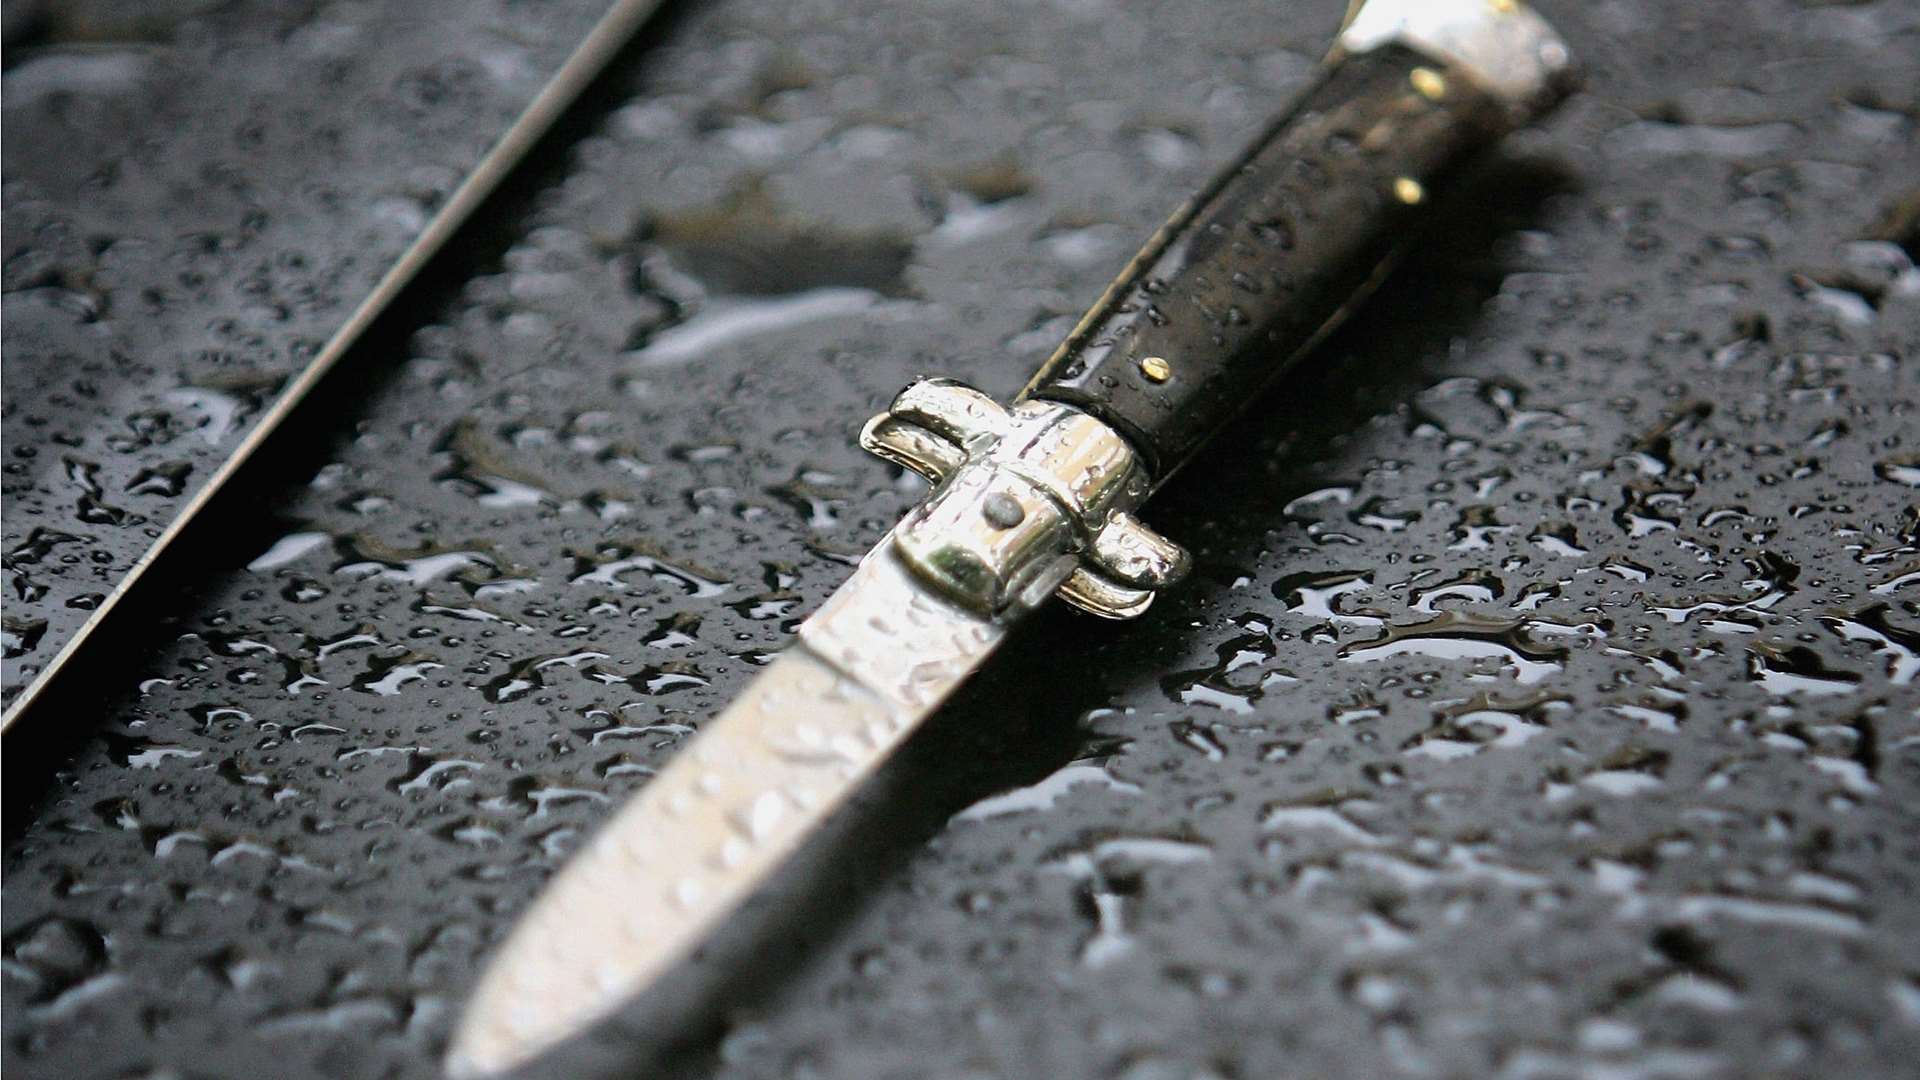 Police were called to Deal following reports a person was in possession of a knife. Stock Image.